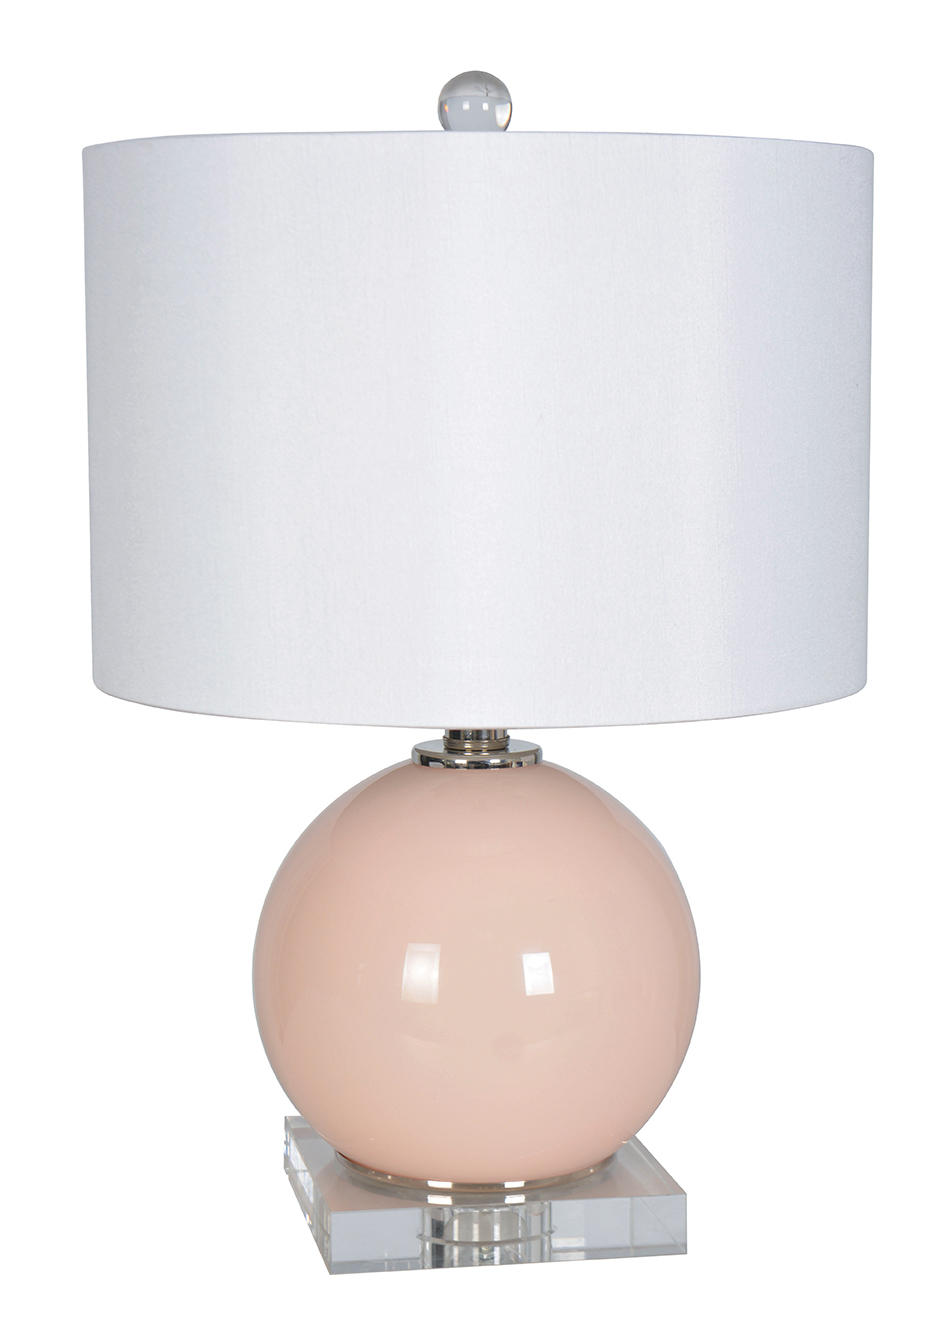 The Delia Lamp from Couture Lamps